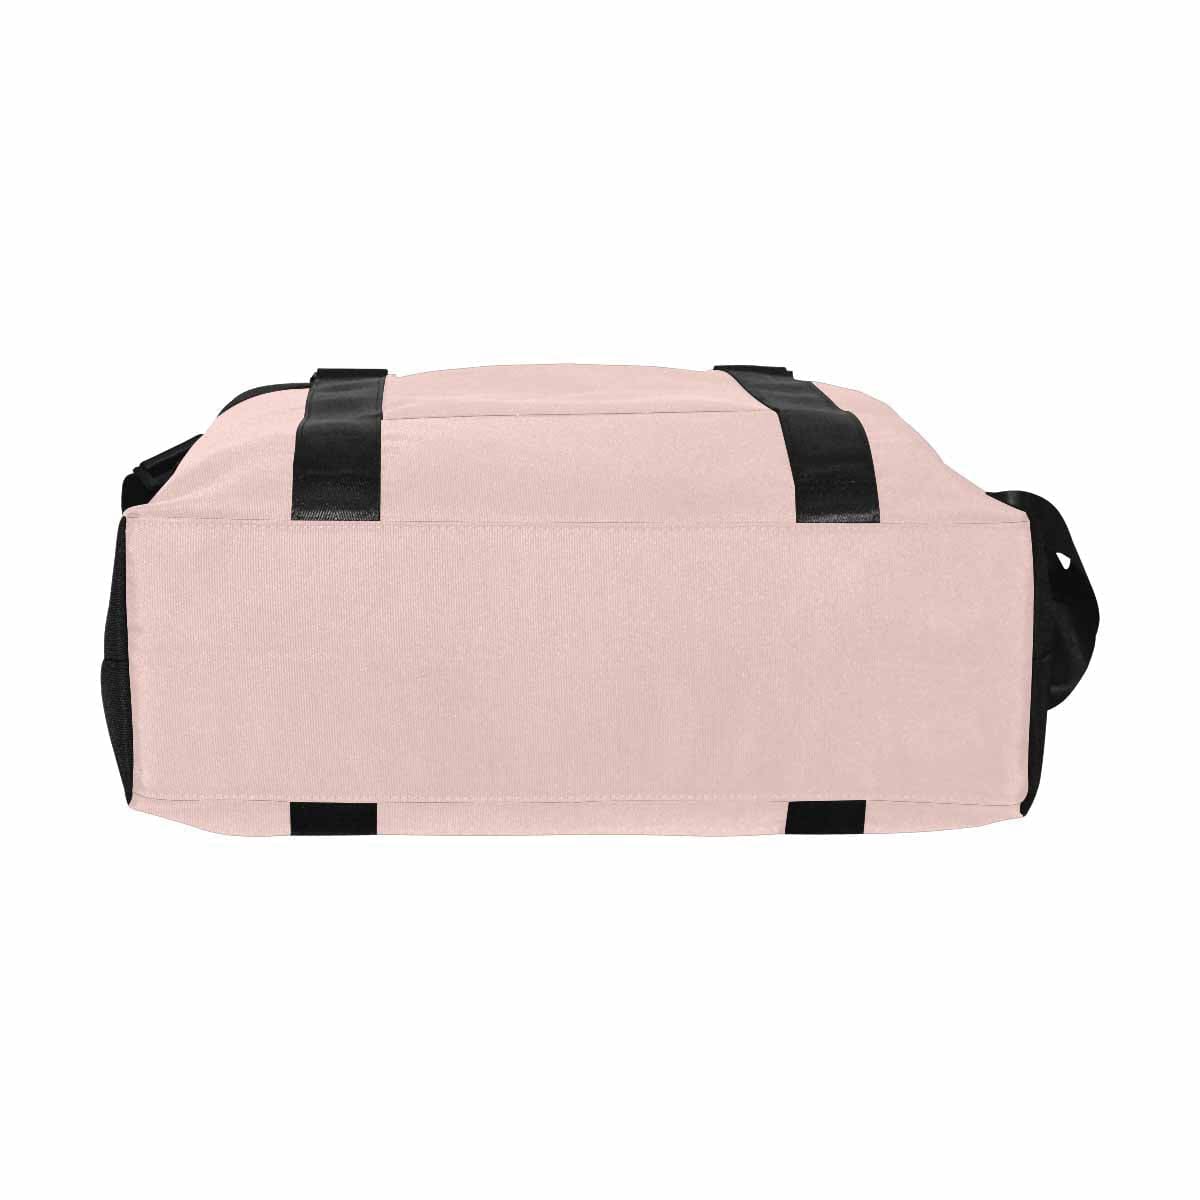 Travel Bag Scallop Seashell Pink Canvas Carry On - Bags | Travel Bags | Canvas